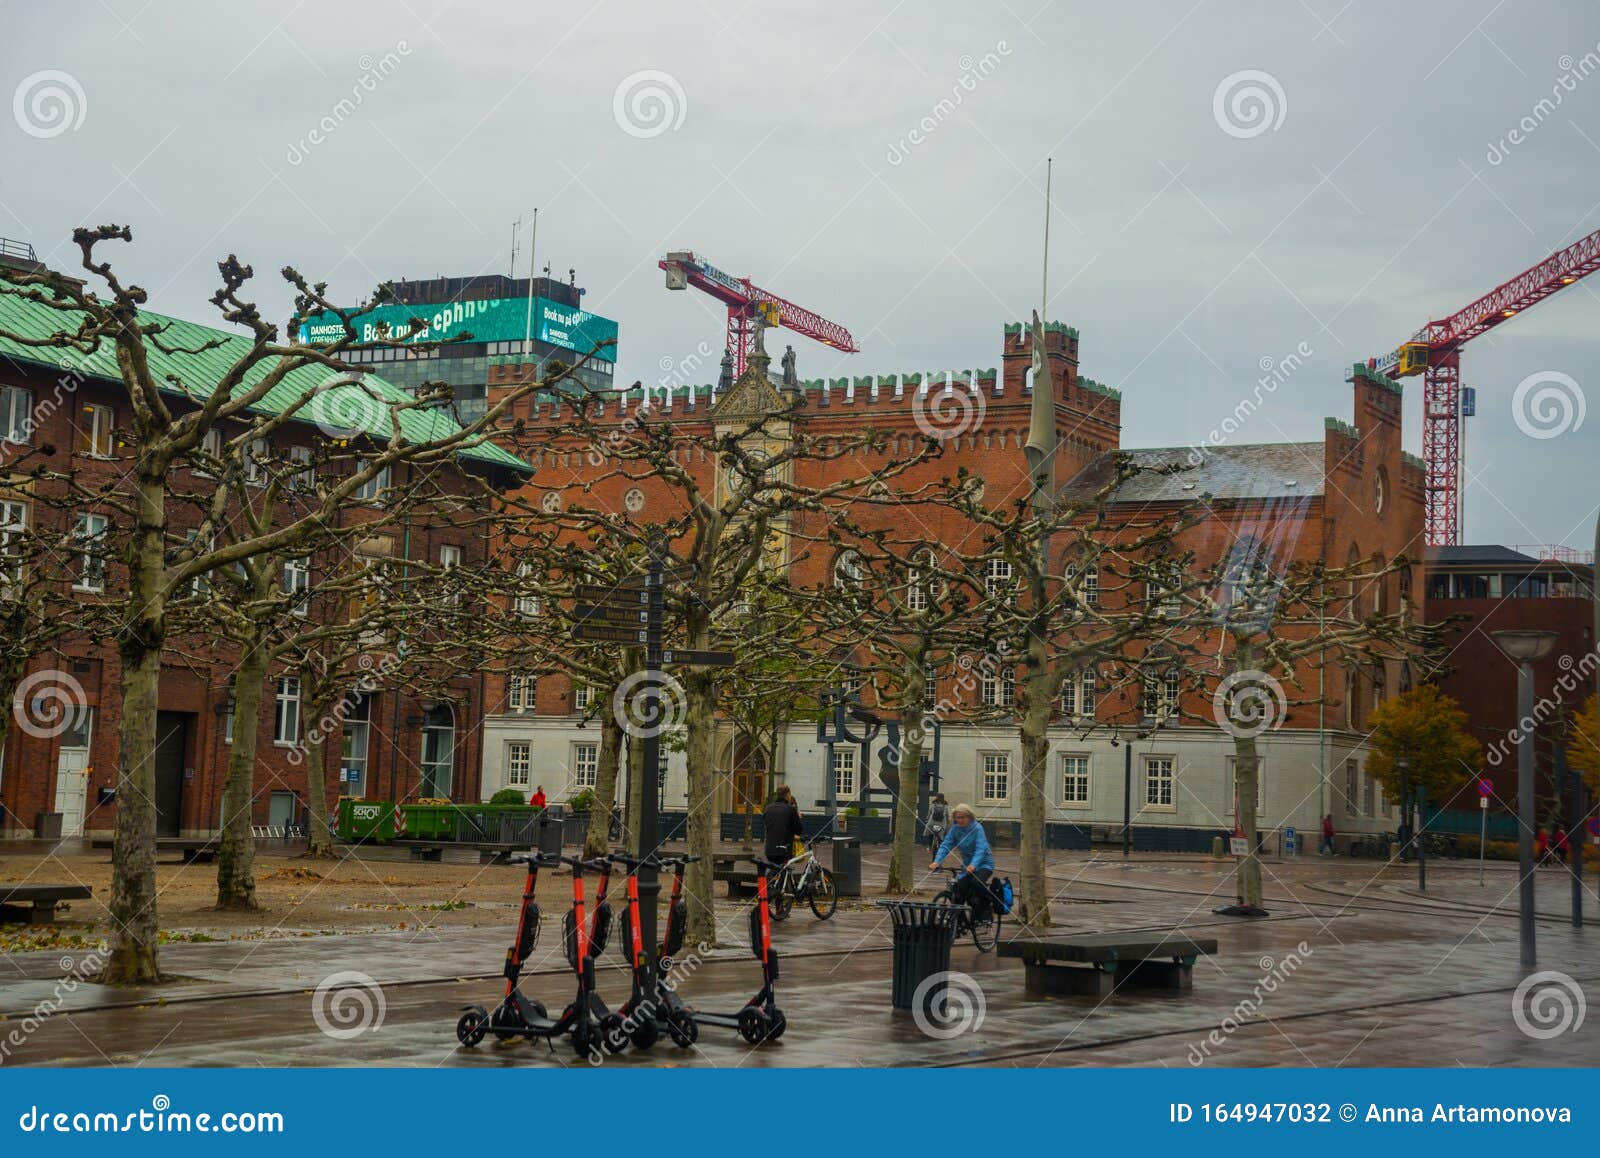 Odense Denmark Odense City Hall Houses The Administrative Offices Of Odense Municipality Editorial Photography Image Of People Center